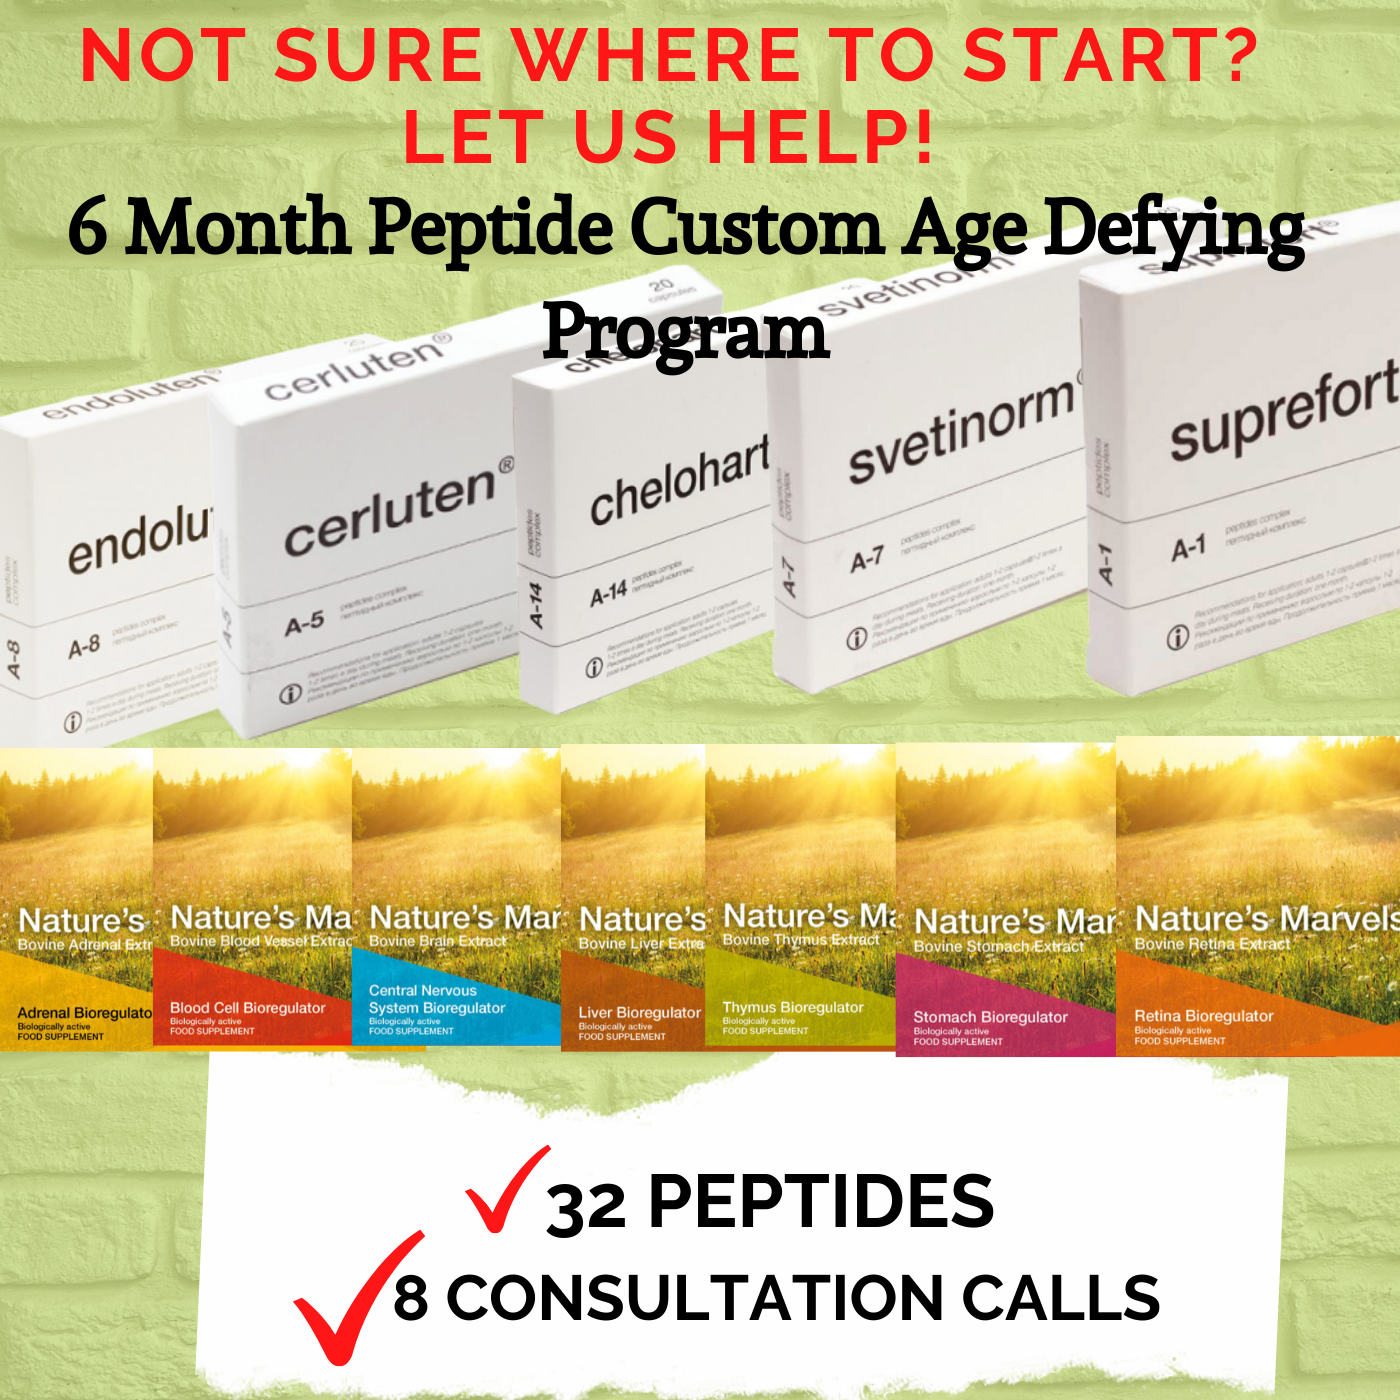 6 Month Peptide Custom Age Defying Program (32 Peptides and 8 Consultation Calls)